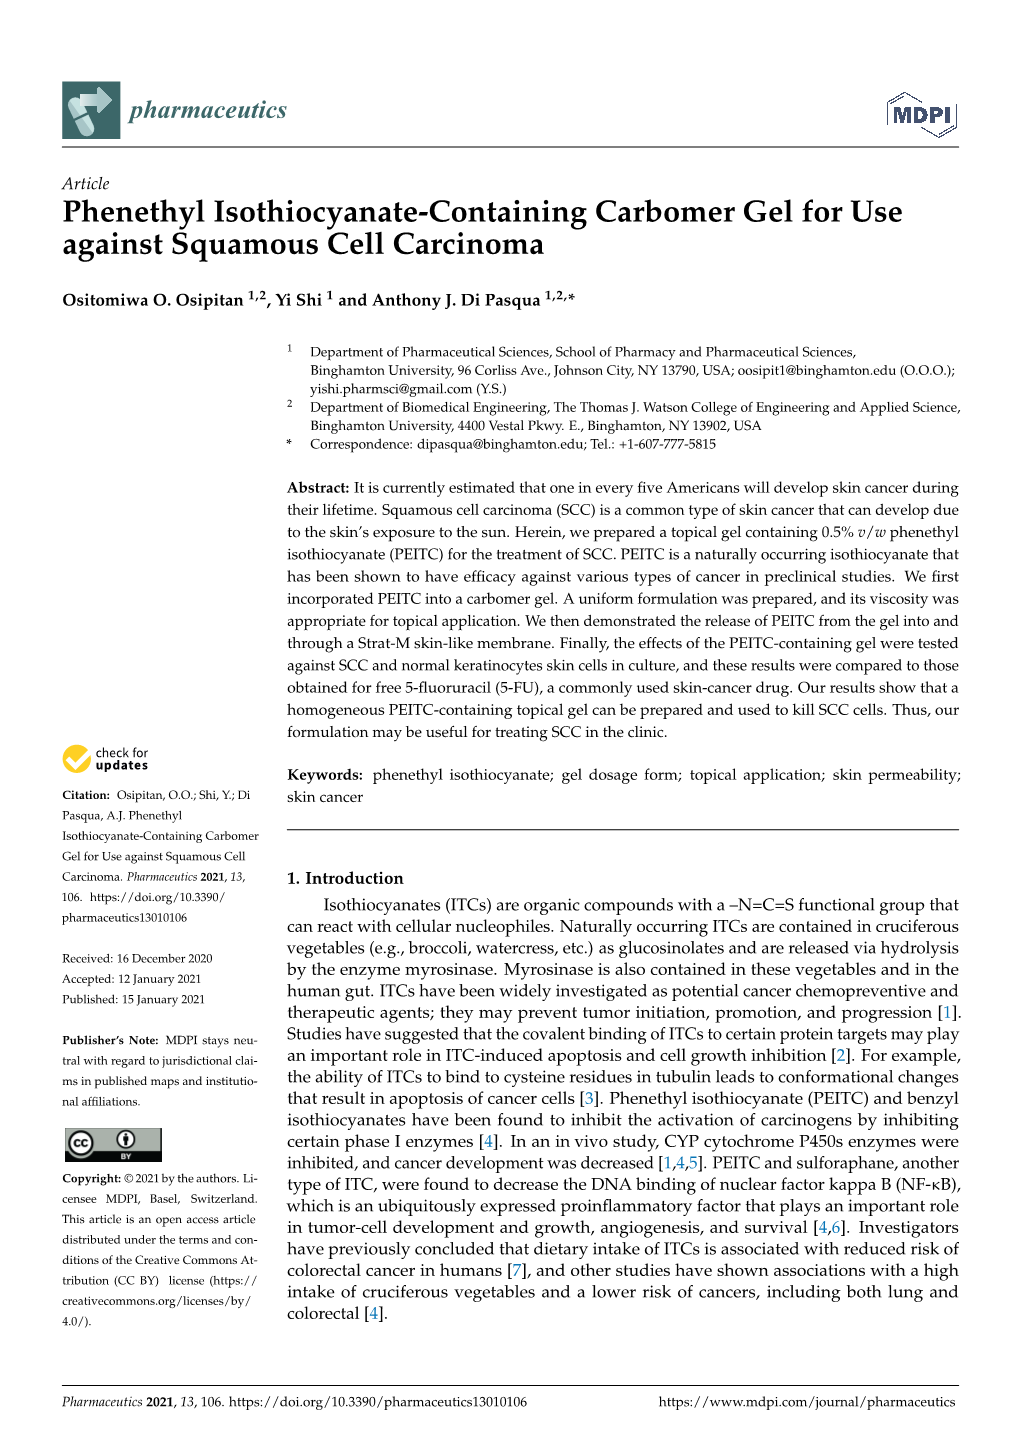 Phenethyl Isothiocyanate-Containing Carbomer Gel for Use Against Squamous Cell Carcinoma